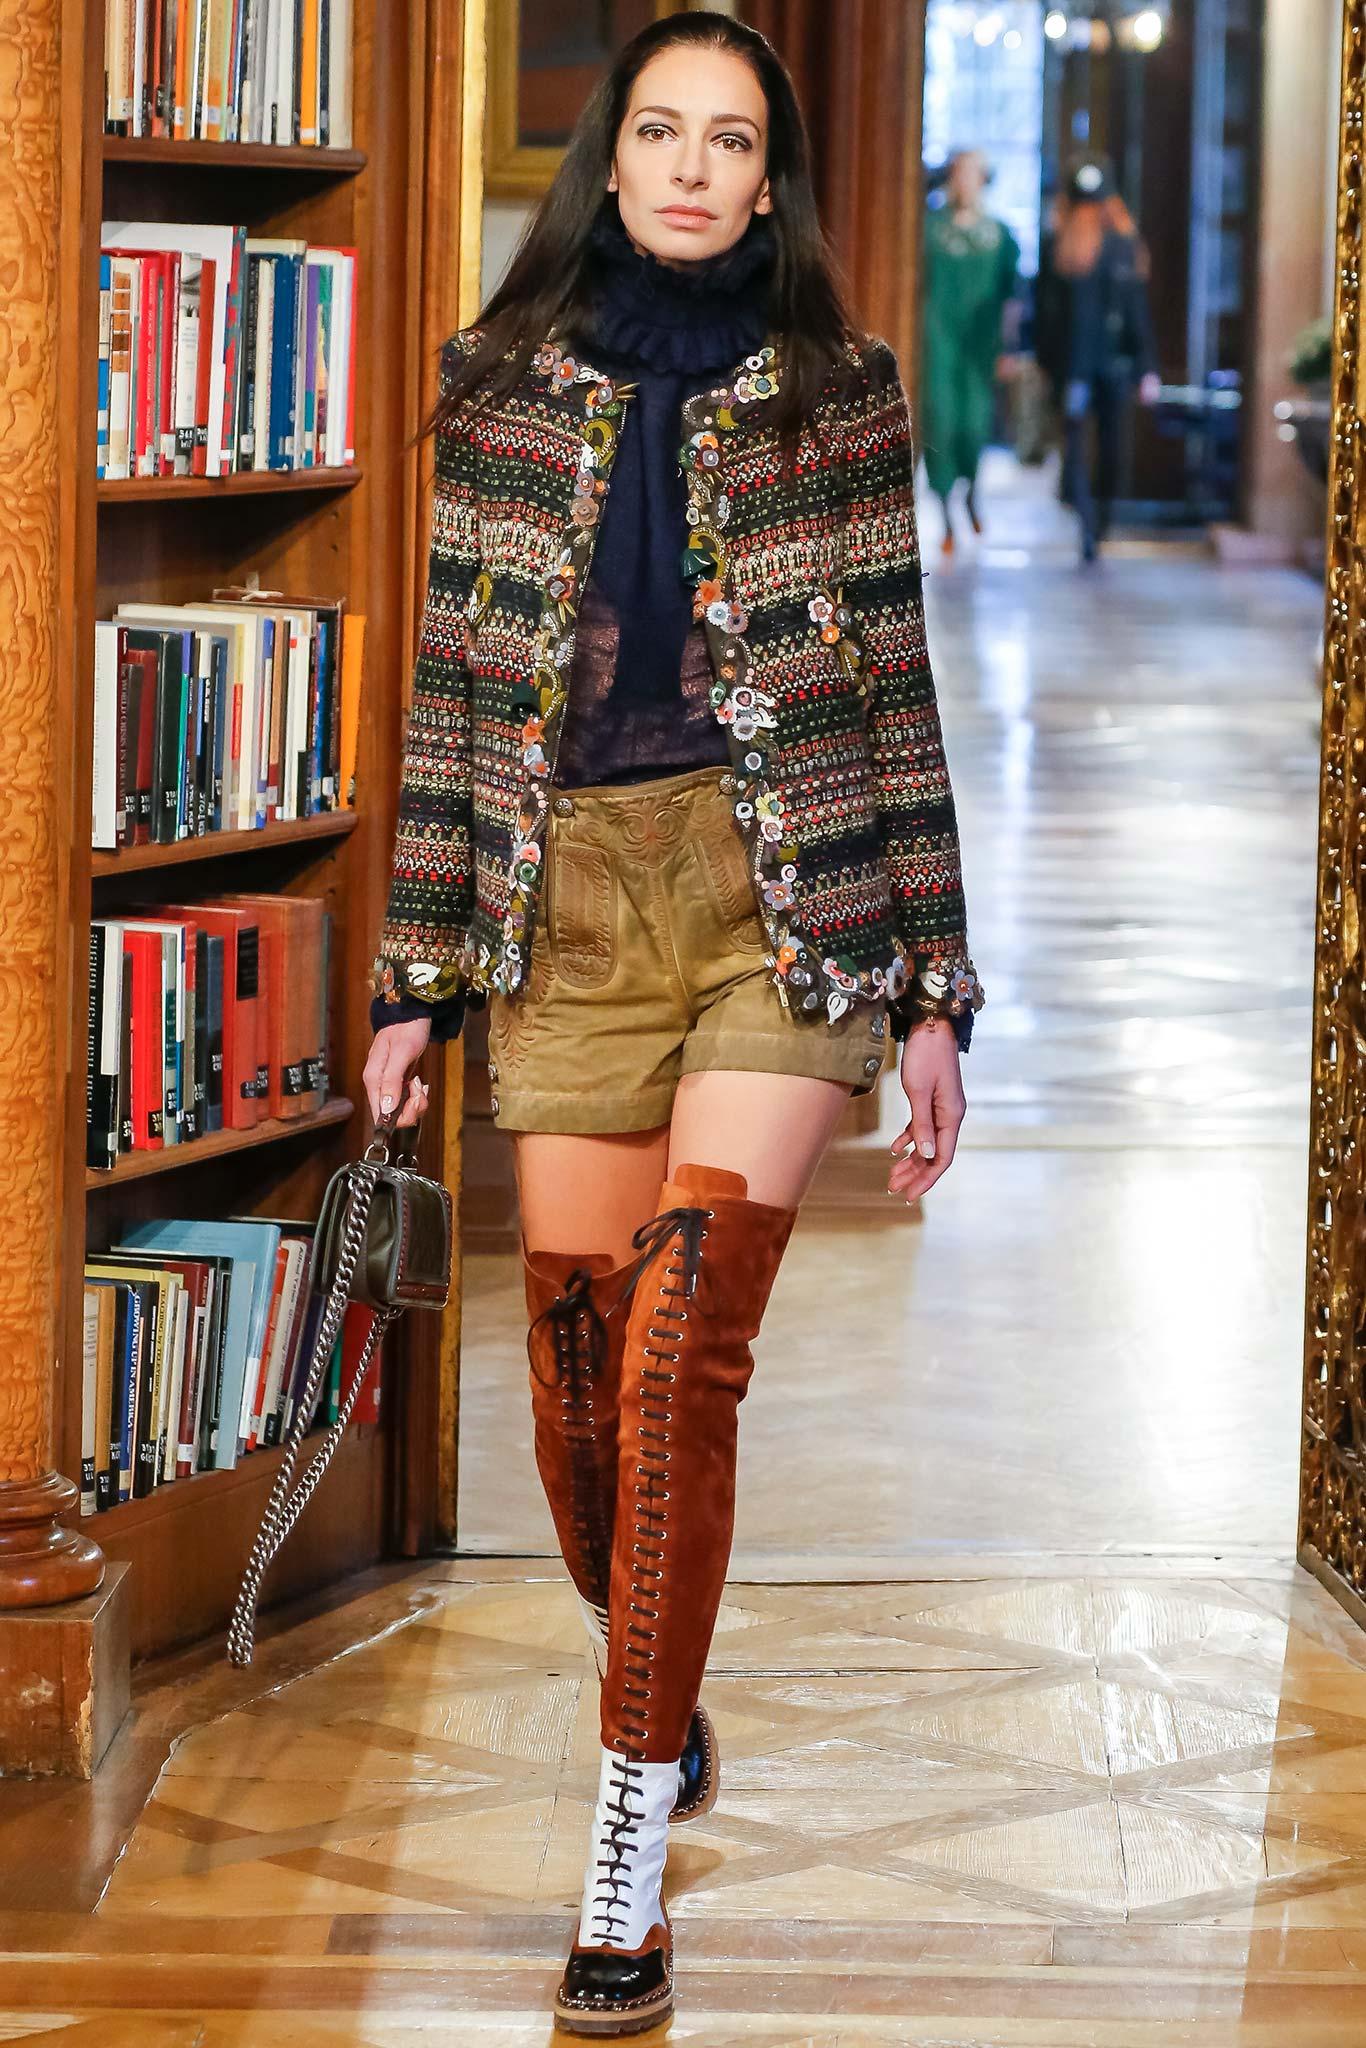 Absolutely stunning Chanel lesage tweed jacket from Runway of  Paris / Salzburg Collection, Metiers d'Art 2015 Pre-Fall, 15A
Inspired by Tyrolean motifs; details like a masterpiece! 
As seen on Keira Khightley.
- Gorgeous tweed in different shades